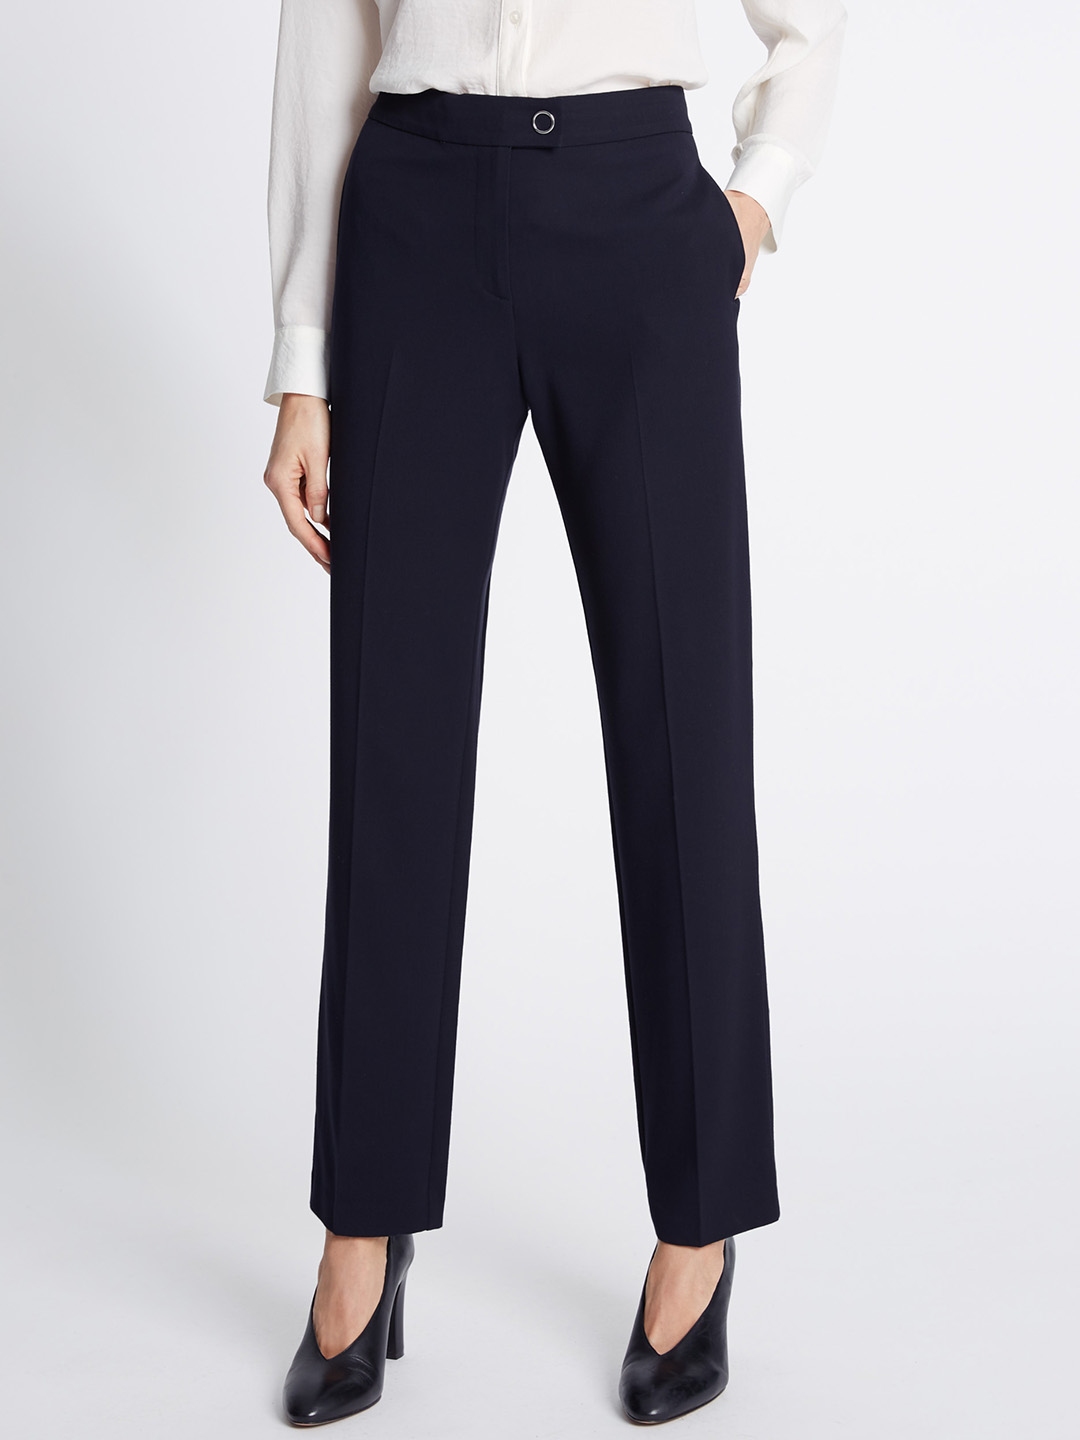 Navy Pants  White Blouse  Petite Workwear Ideas  Blue trousers outfit Blue  pants outfit Business casual outfits